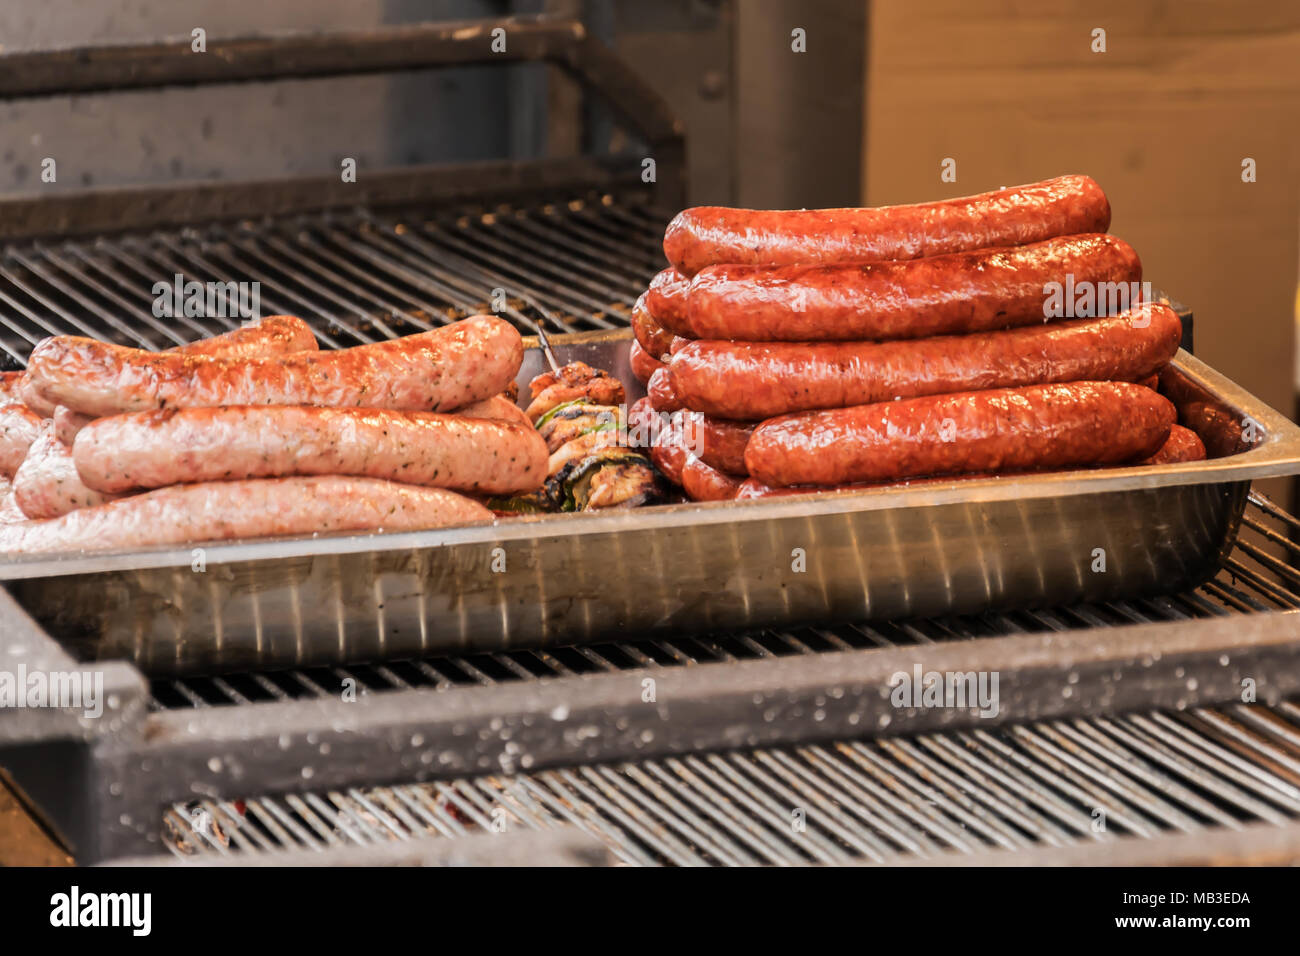 Sausages and kebabs on the grill. Baked and ready to eat. Stock Photo